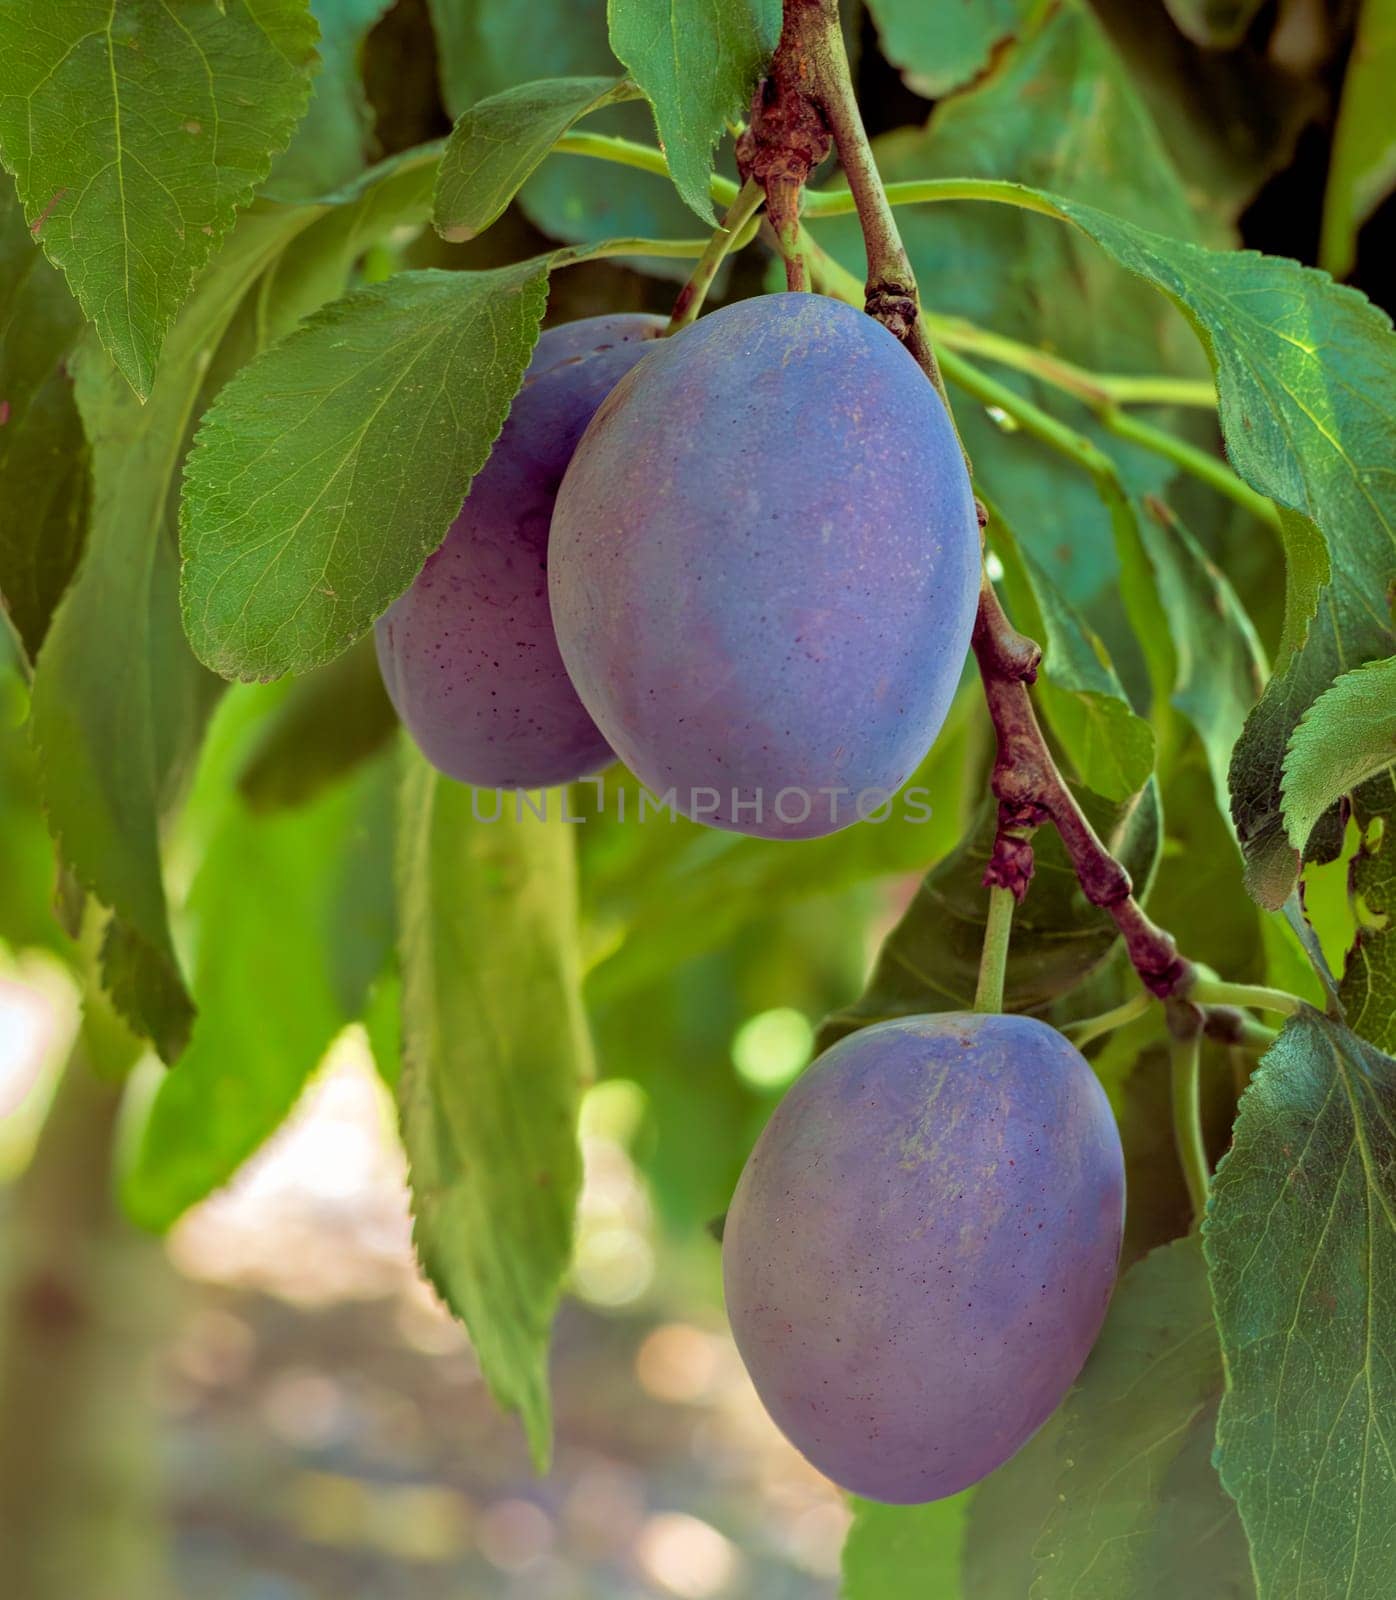 Prune plums on a brench. Ripen blue plums growing among the leaves.